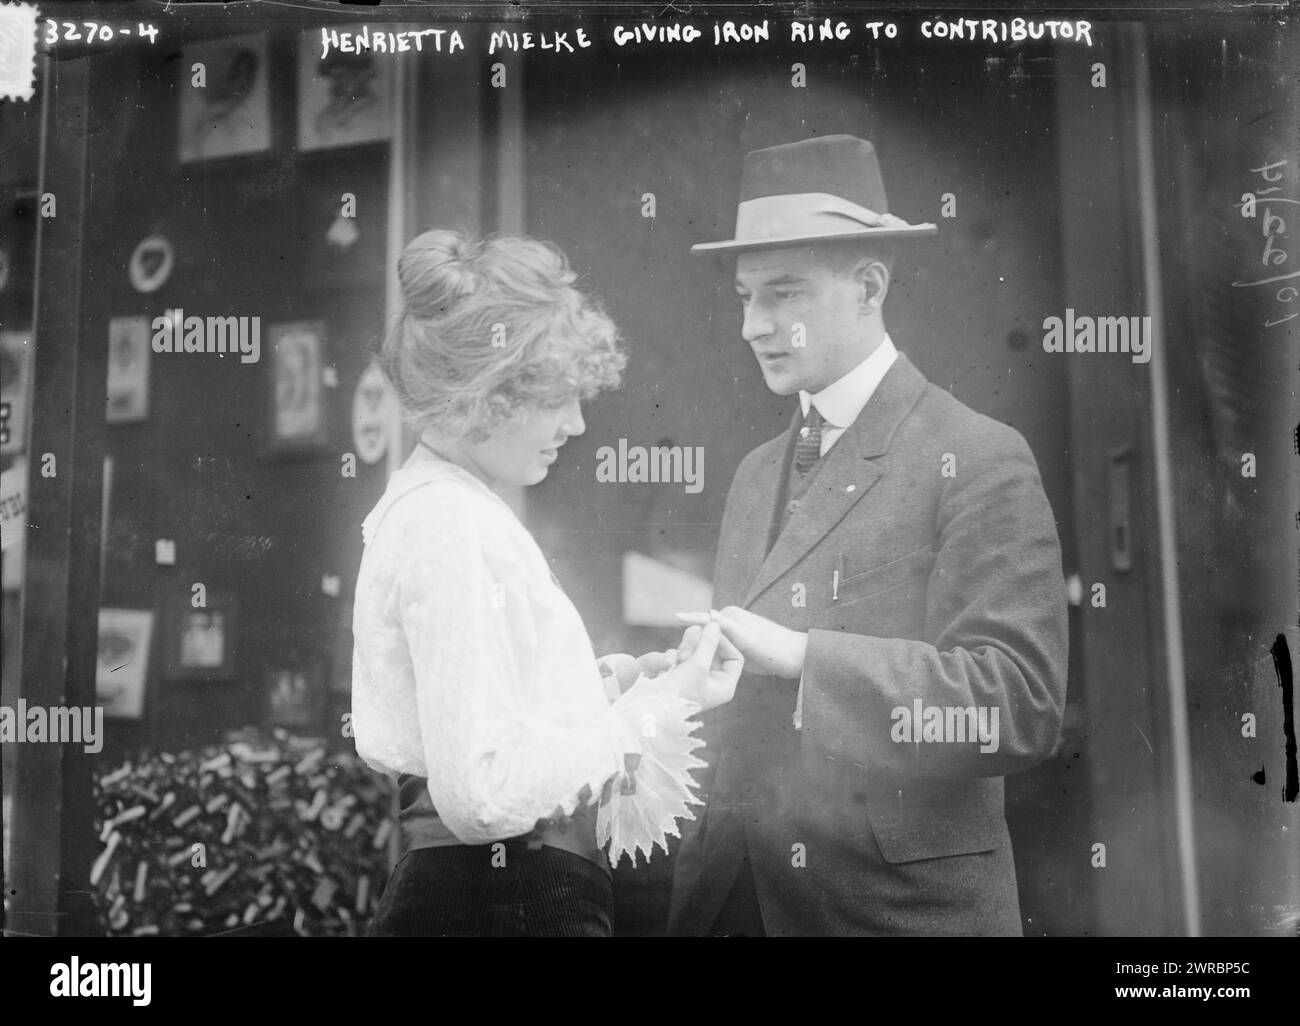 Henrietta Mielke giving iron ring to contributor, Photograph shows Henrietta Mielke (b. 1897) giving a ring to a man. Her father, Henry Mielke was a store owner and member of the 'Gold for Iron' (Gold fur Eisen) organization which gave iron rings to people in exchange for gold and jewels which were used to support the German war effort during World War I. Photograph probably taken outside? Mielke's store located on Second Avenue at the corner of 87th Street in New York City., 1914 Oct. 22, World War, 1914-1918, Glass negatives Stock Photo